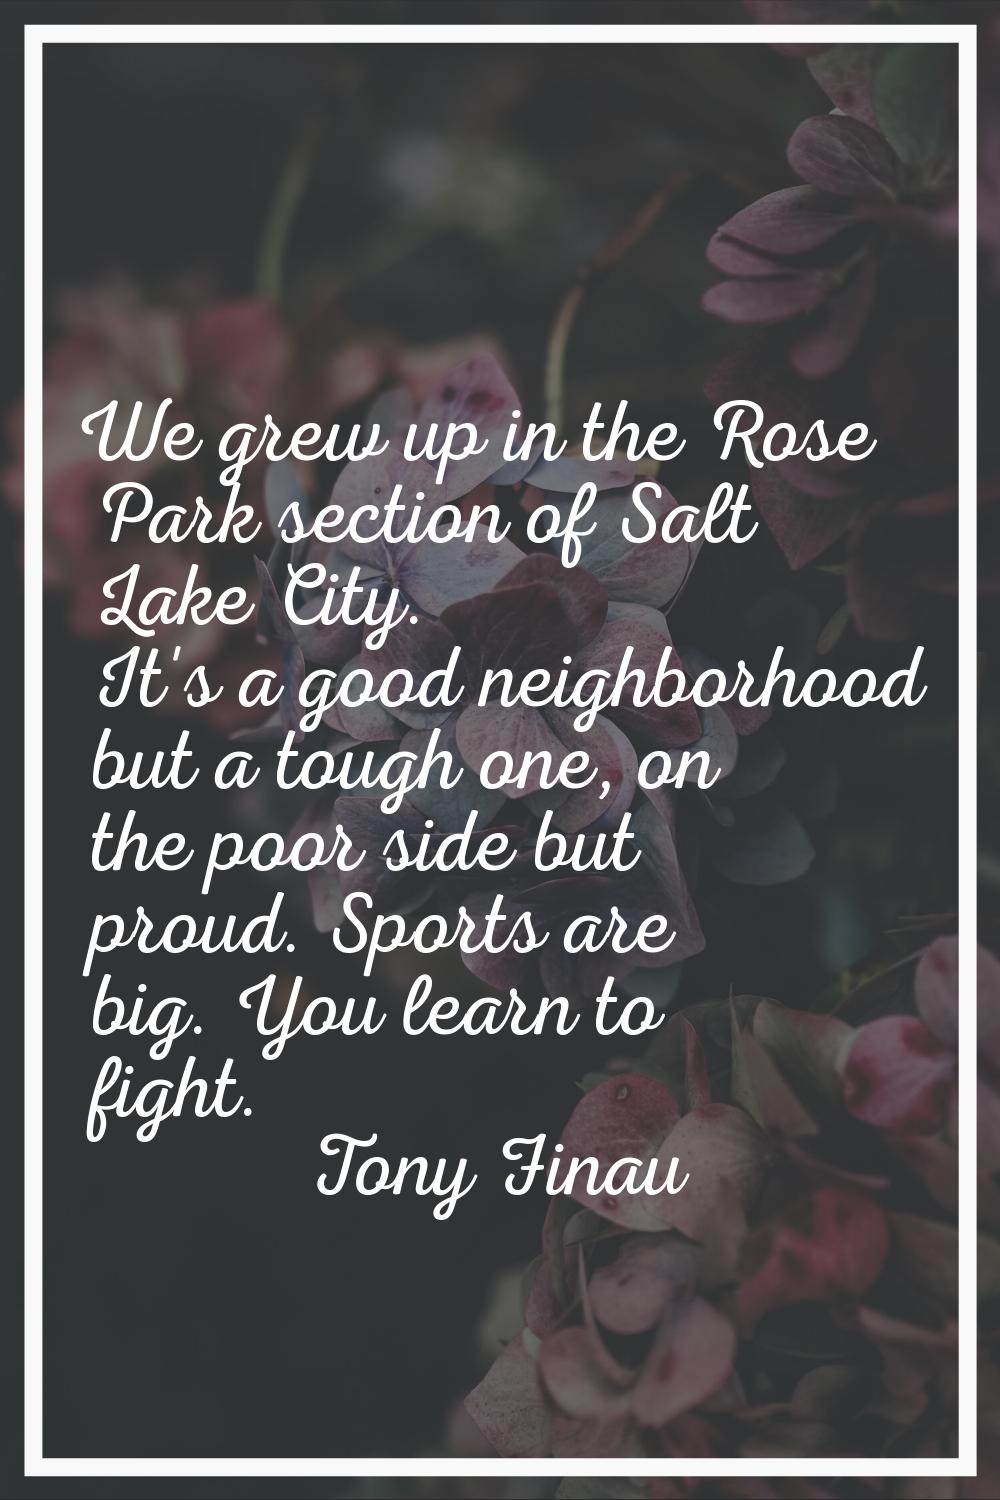 We grew up in the Rose Park section of Salt Lake City. It's a good neighborhood but a tough one, on